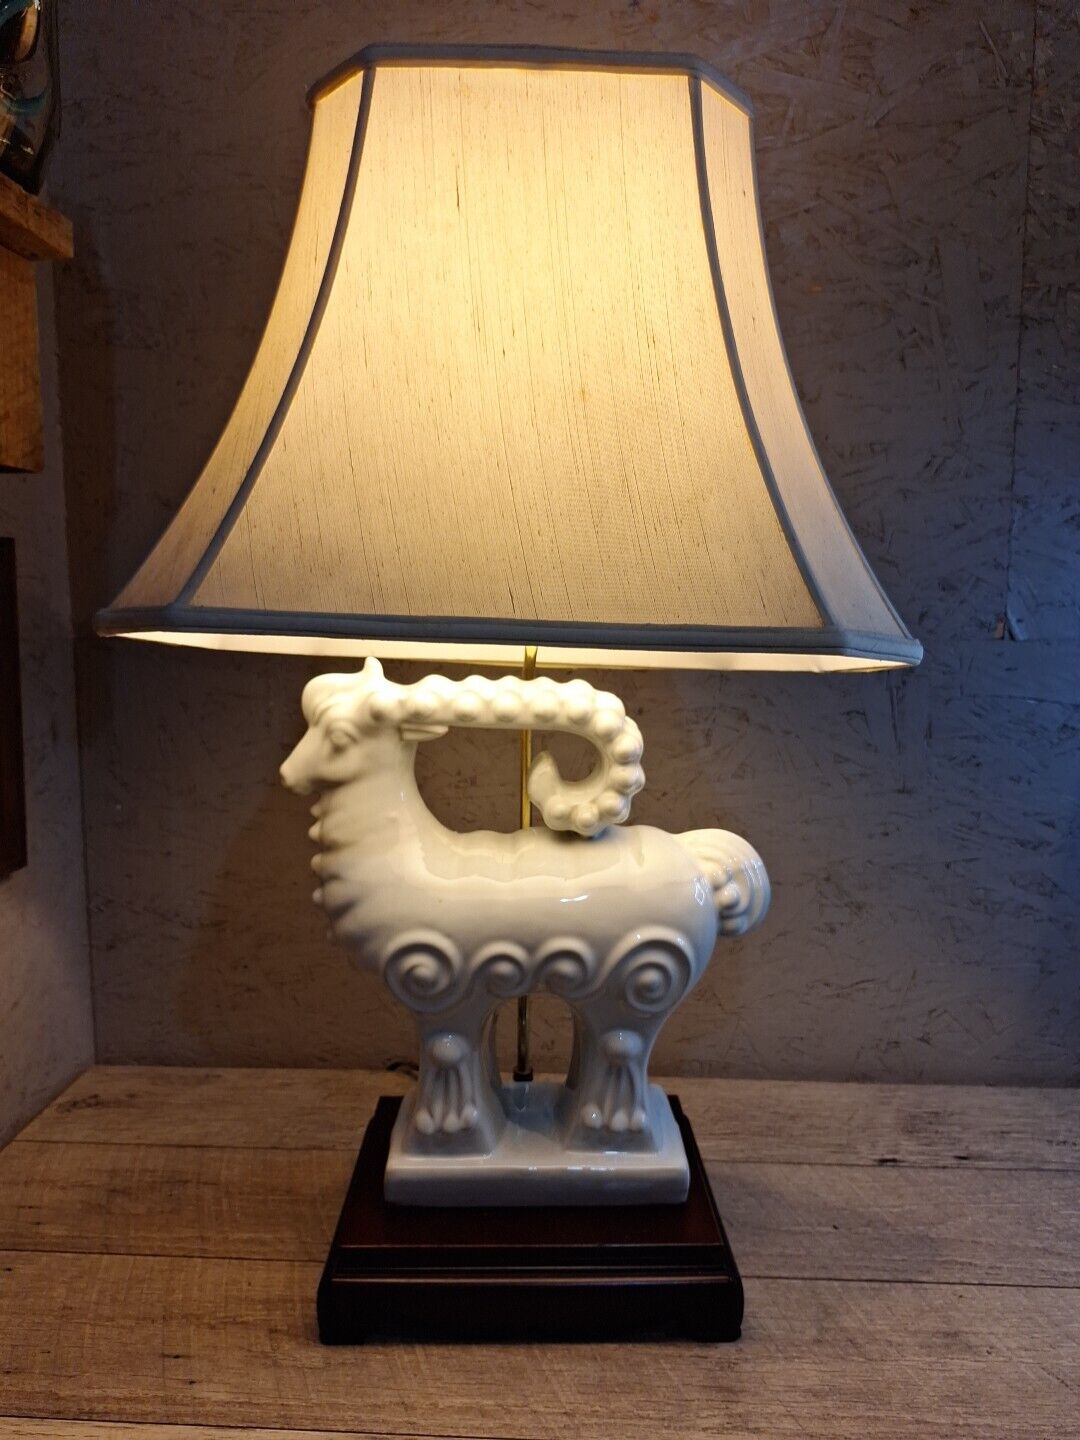 Large Ram Lamp Possibly Porcelain?  Very Heavy Beautiful One Of A Kind